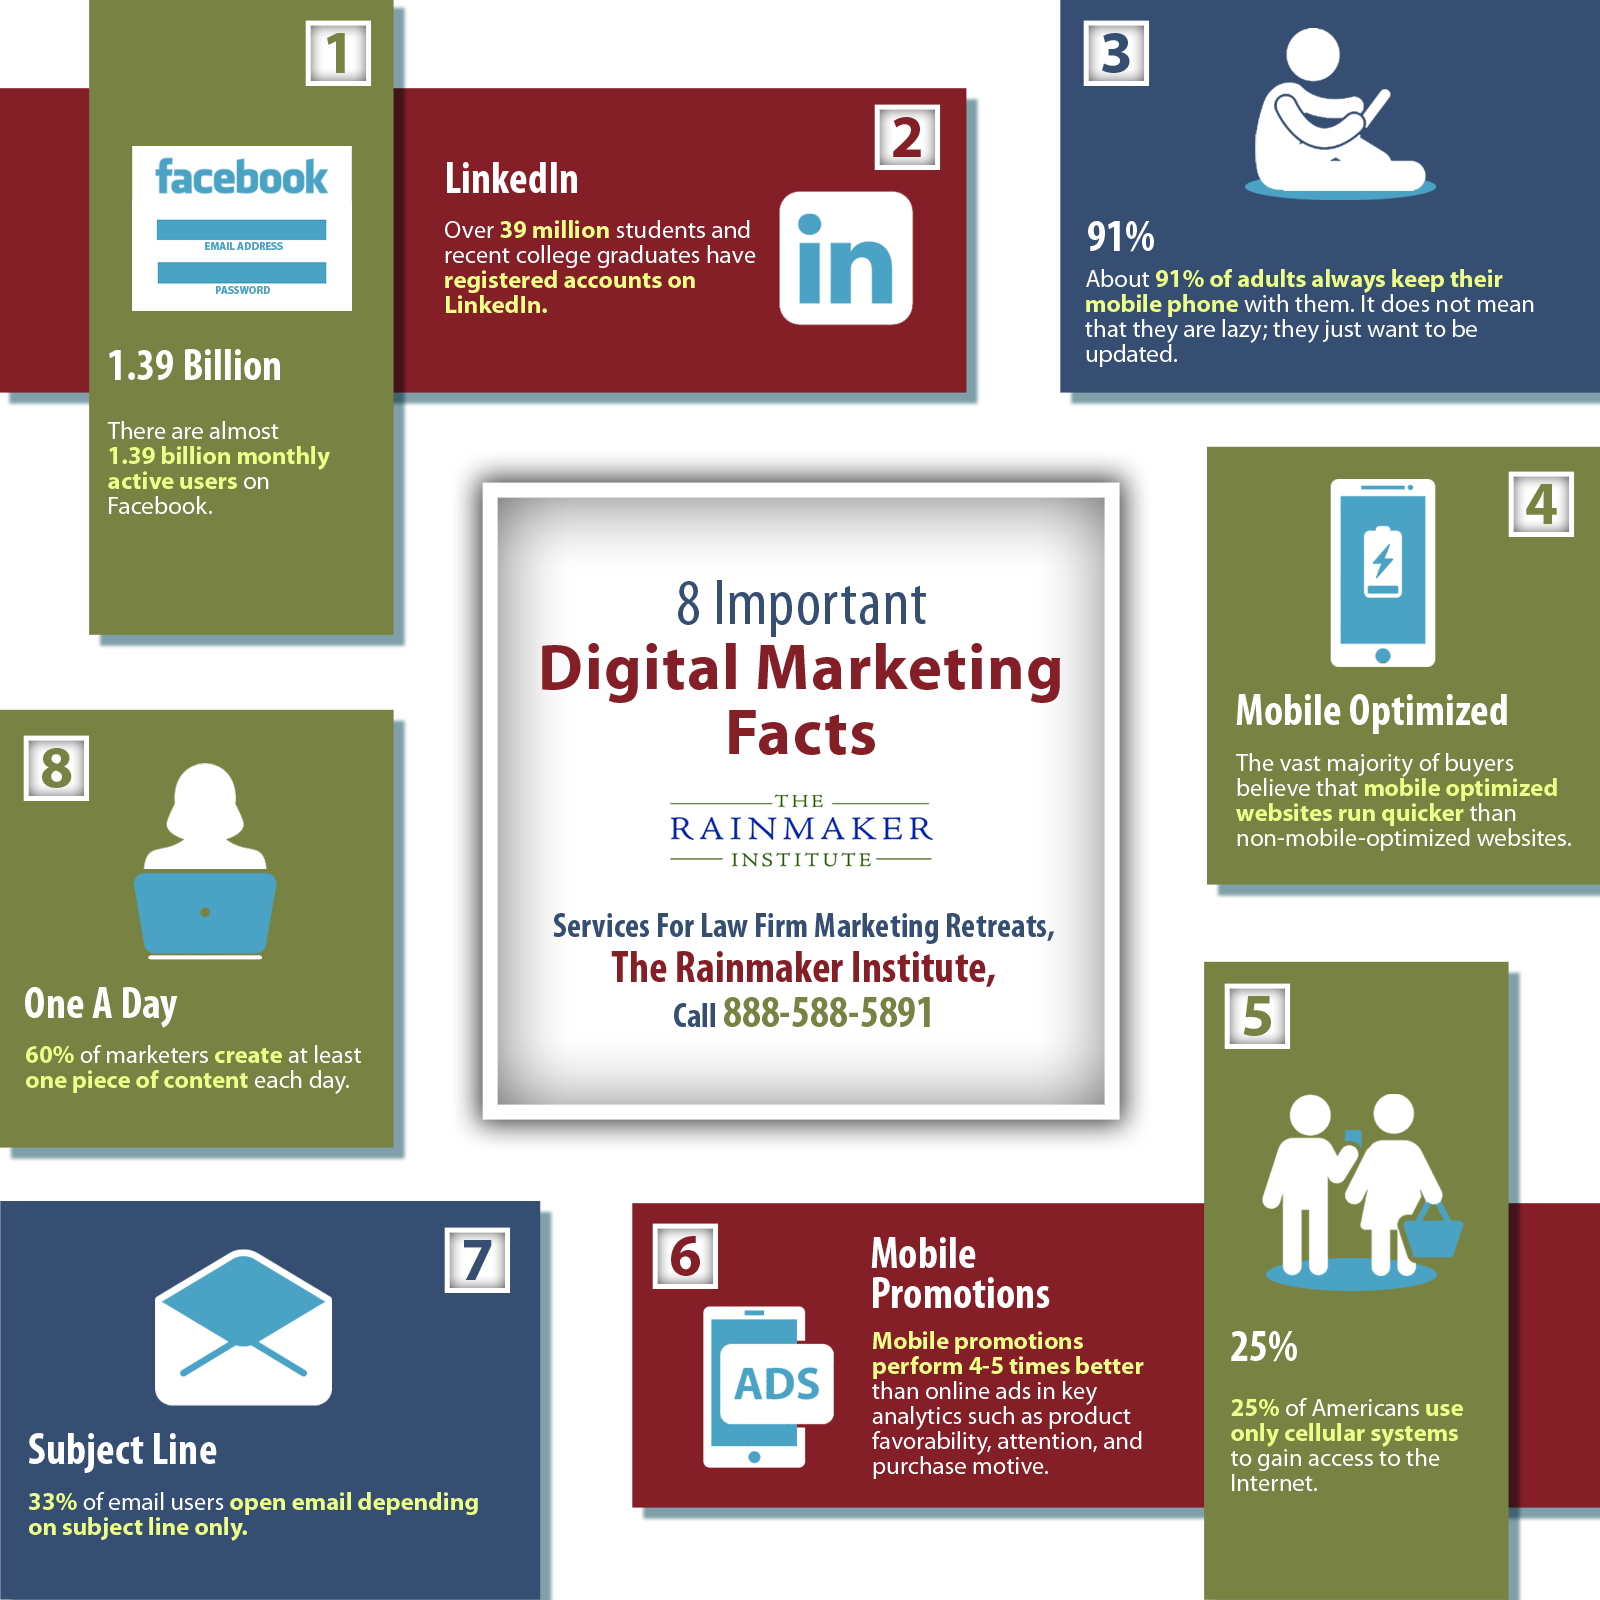 8 Important Digital Marketing Facts Shared Info Graphics